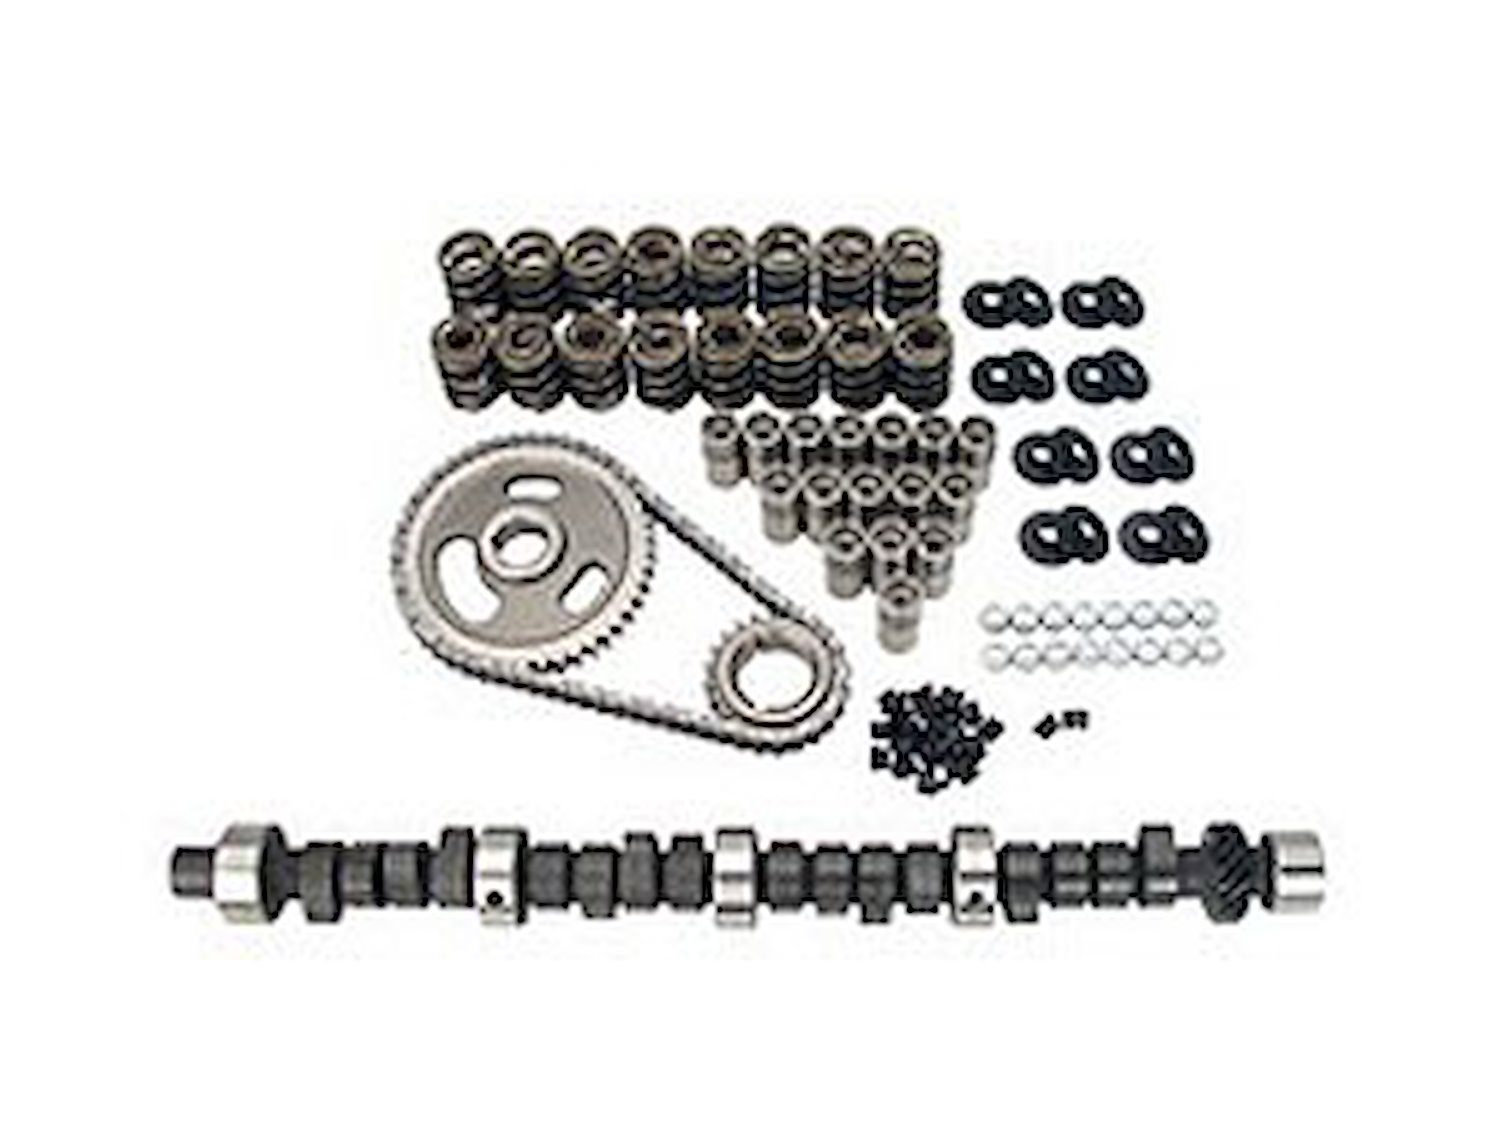 Xtreme Energy 274H Hydraulic Flat Tappet Camshaft Complete Kit Lift .488"/.491" Duration 274°/286° RPM Range 1800-6000